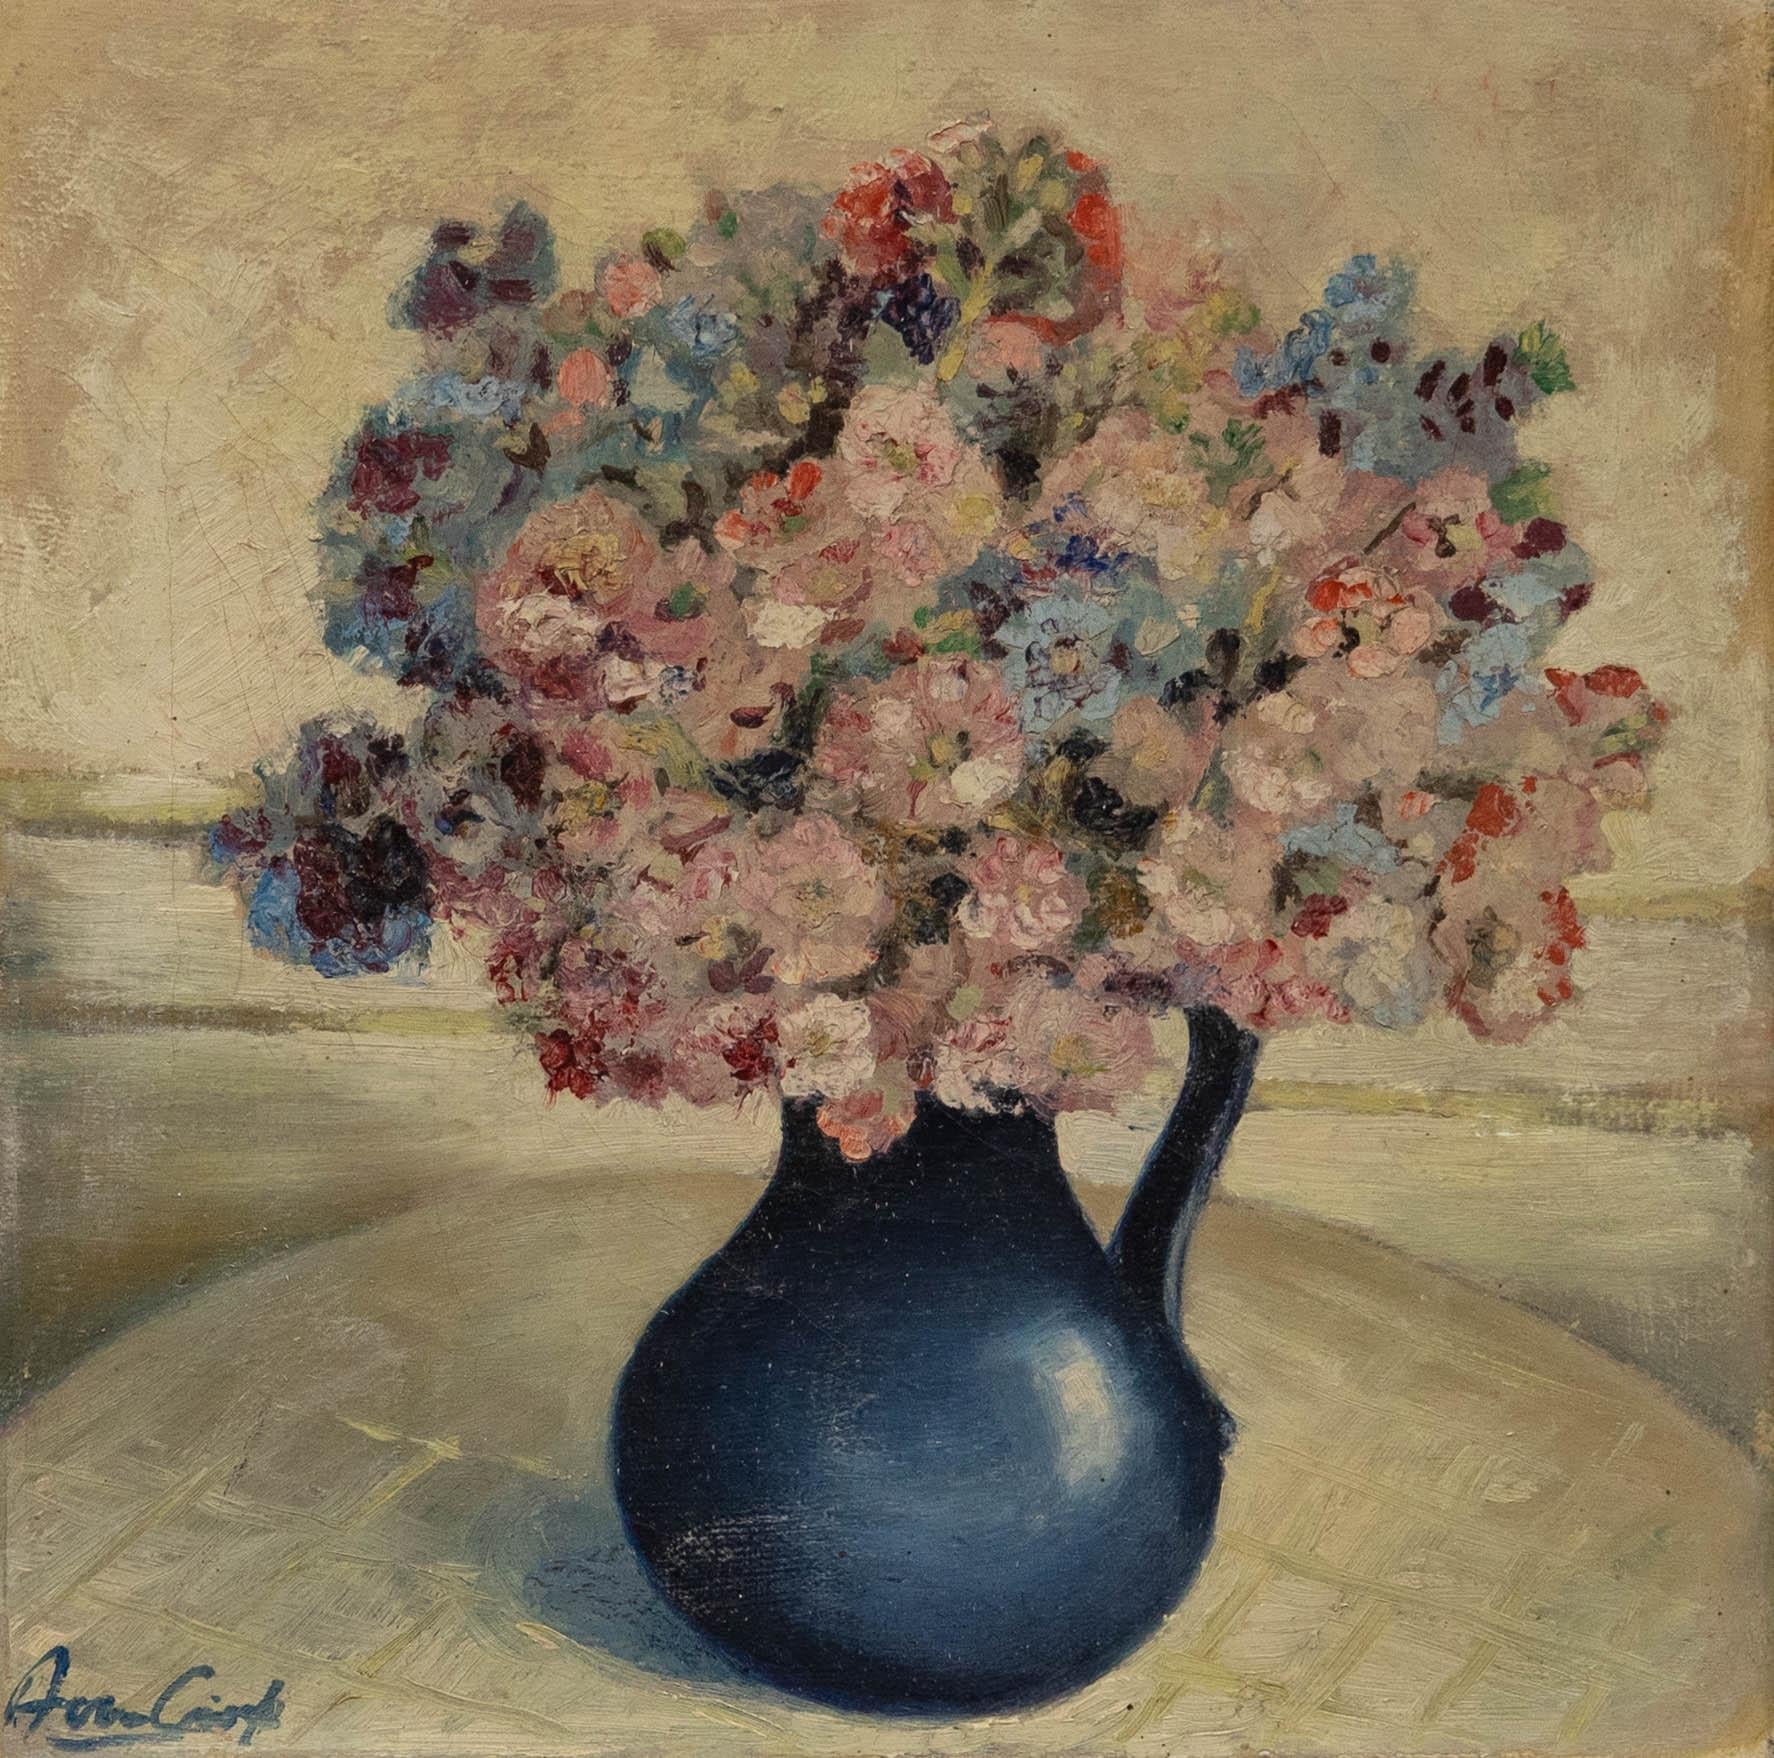 Avon Crisp - 1948 Oil, Study of Summer Flowers - Painting by Unknown